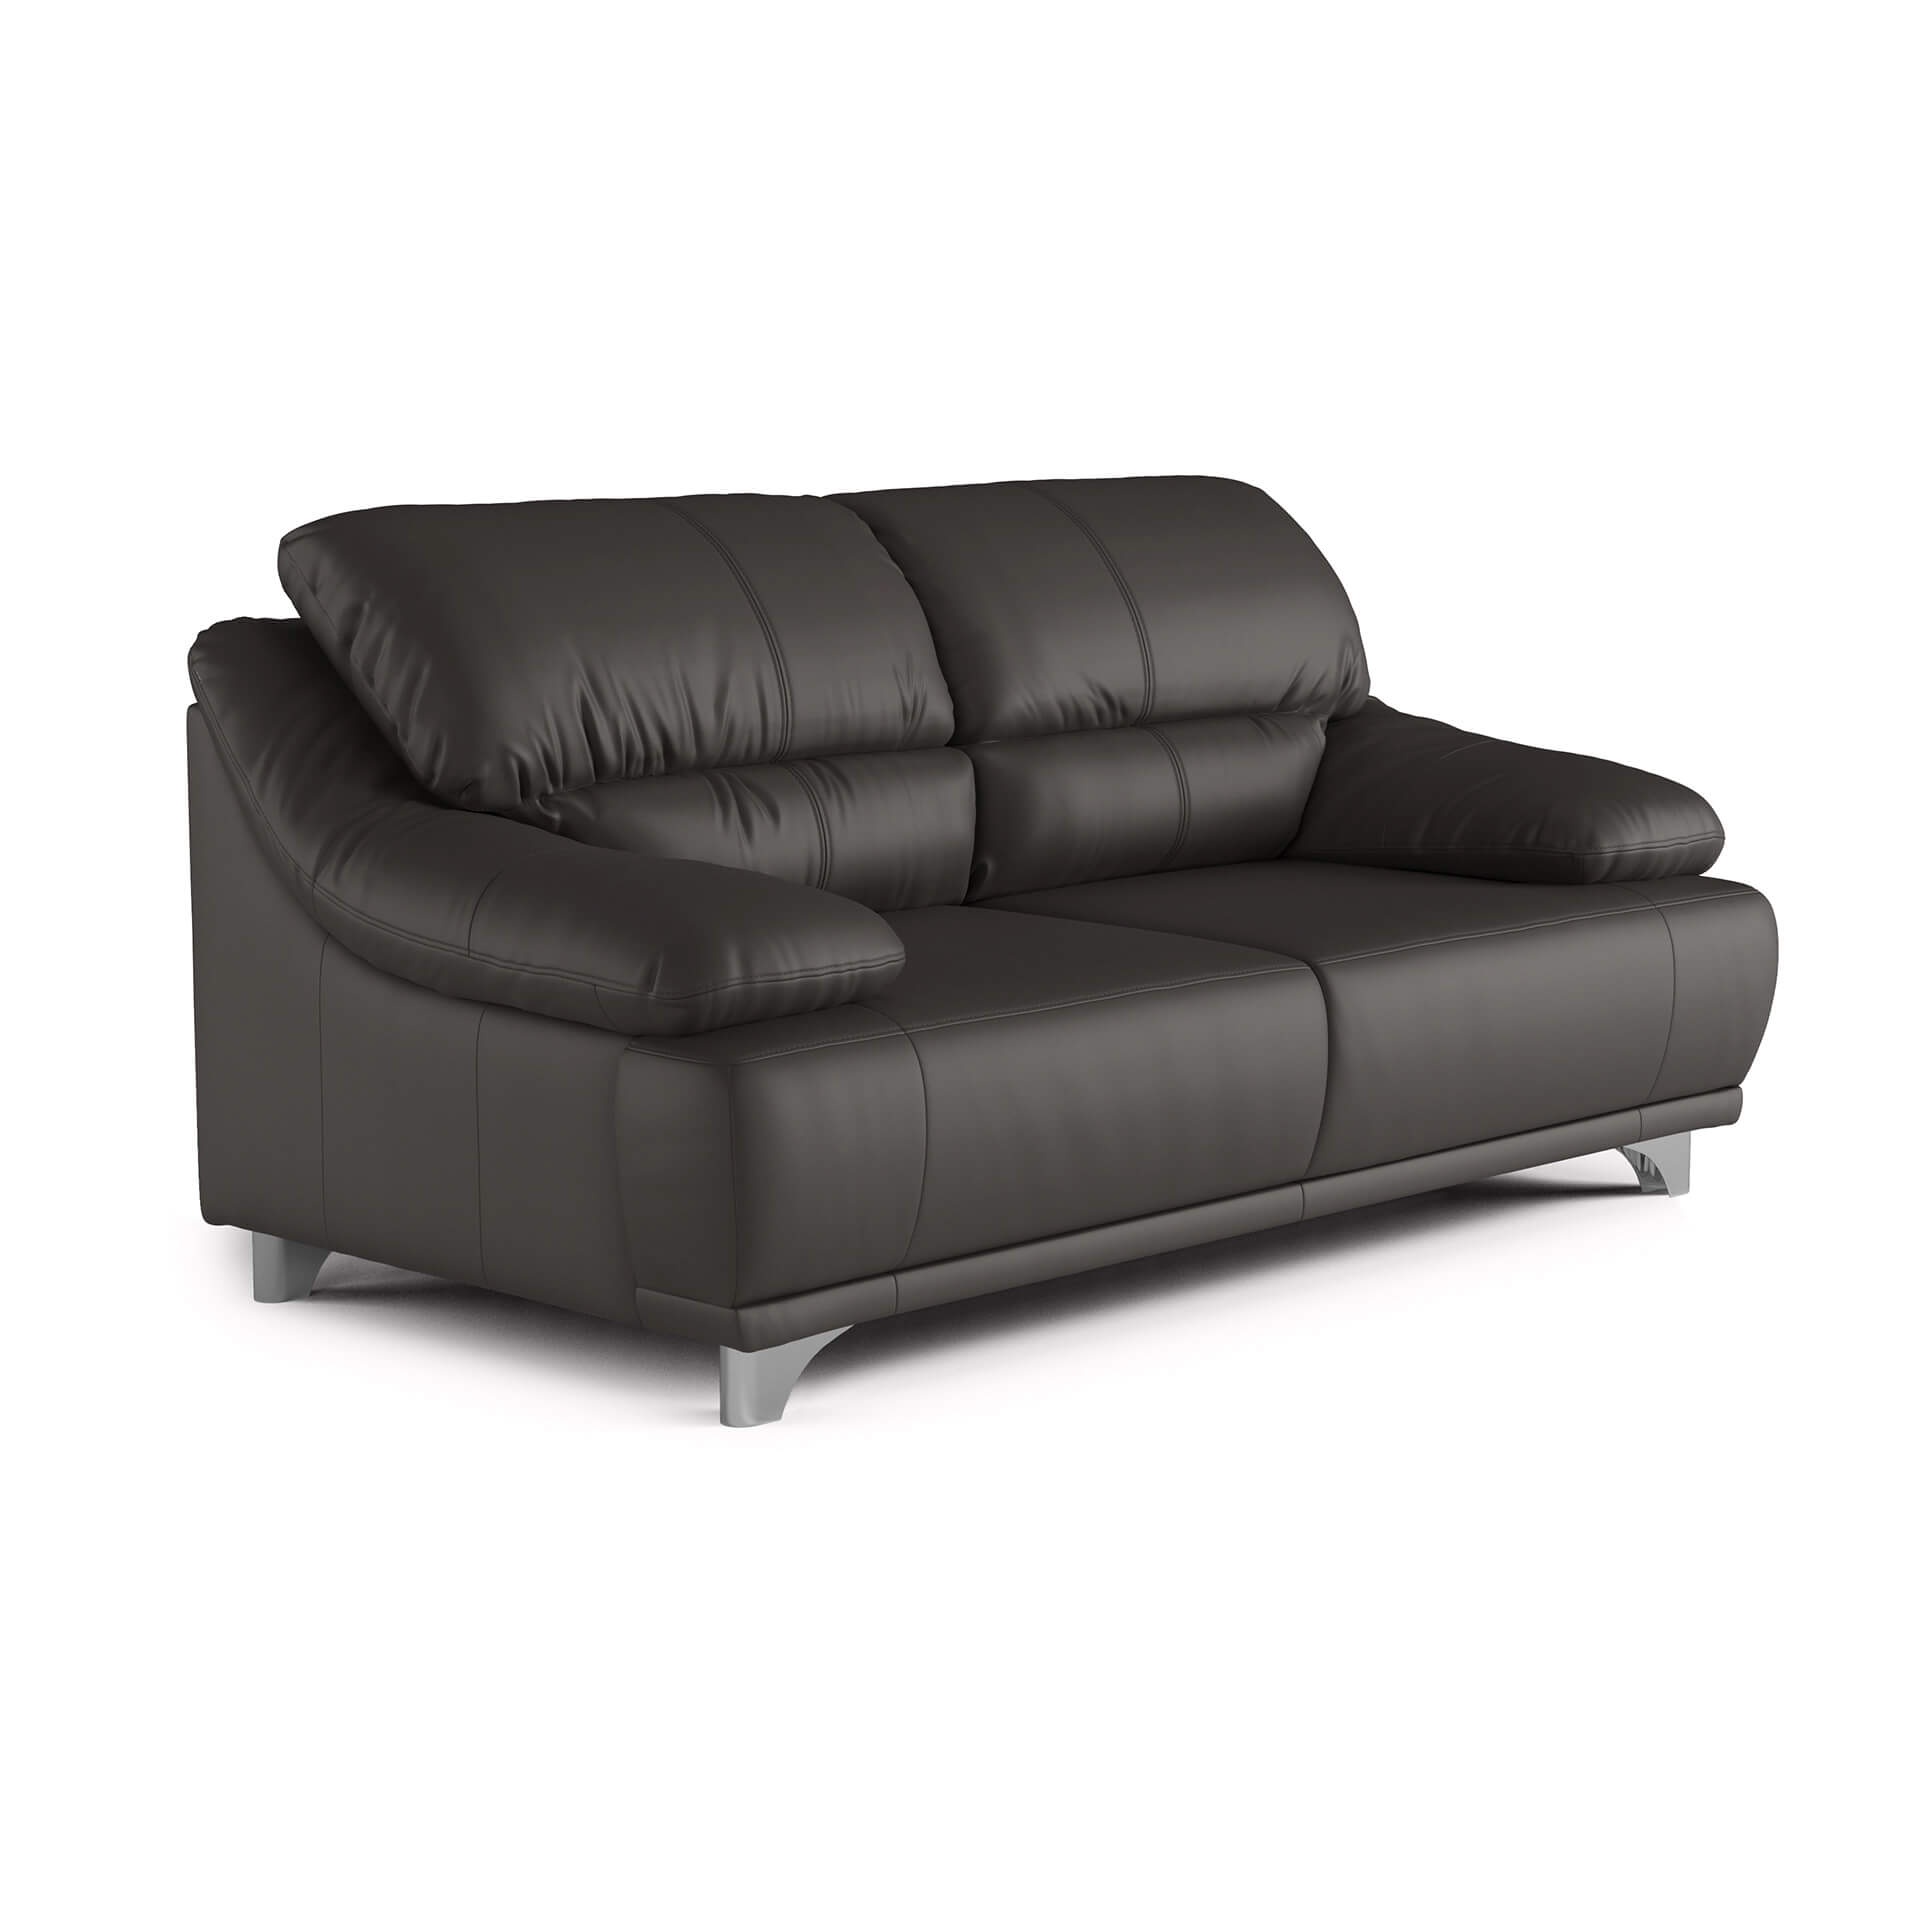 Silo 3D Rendering of Black Leather Sofa